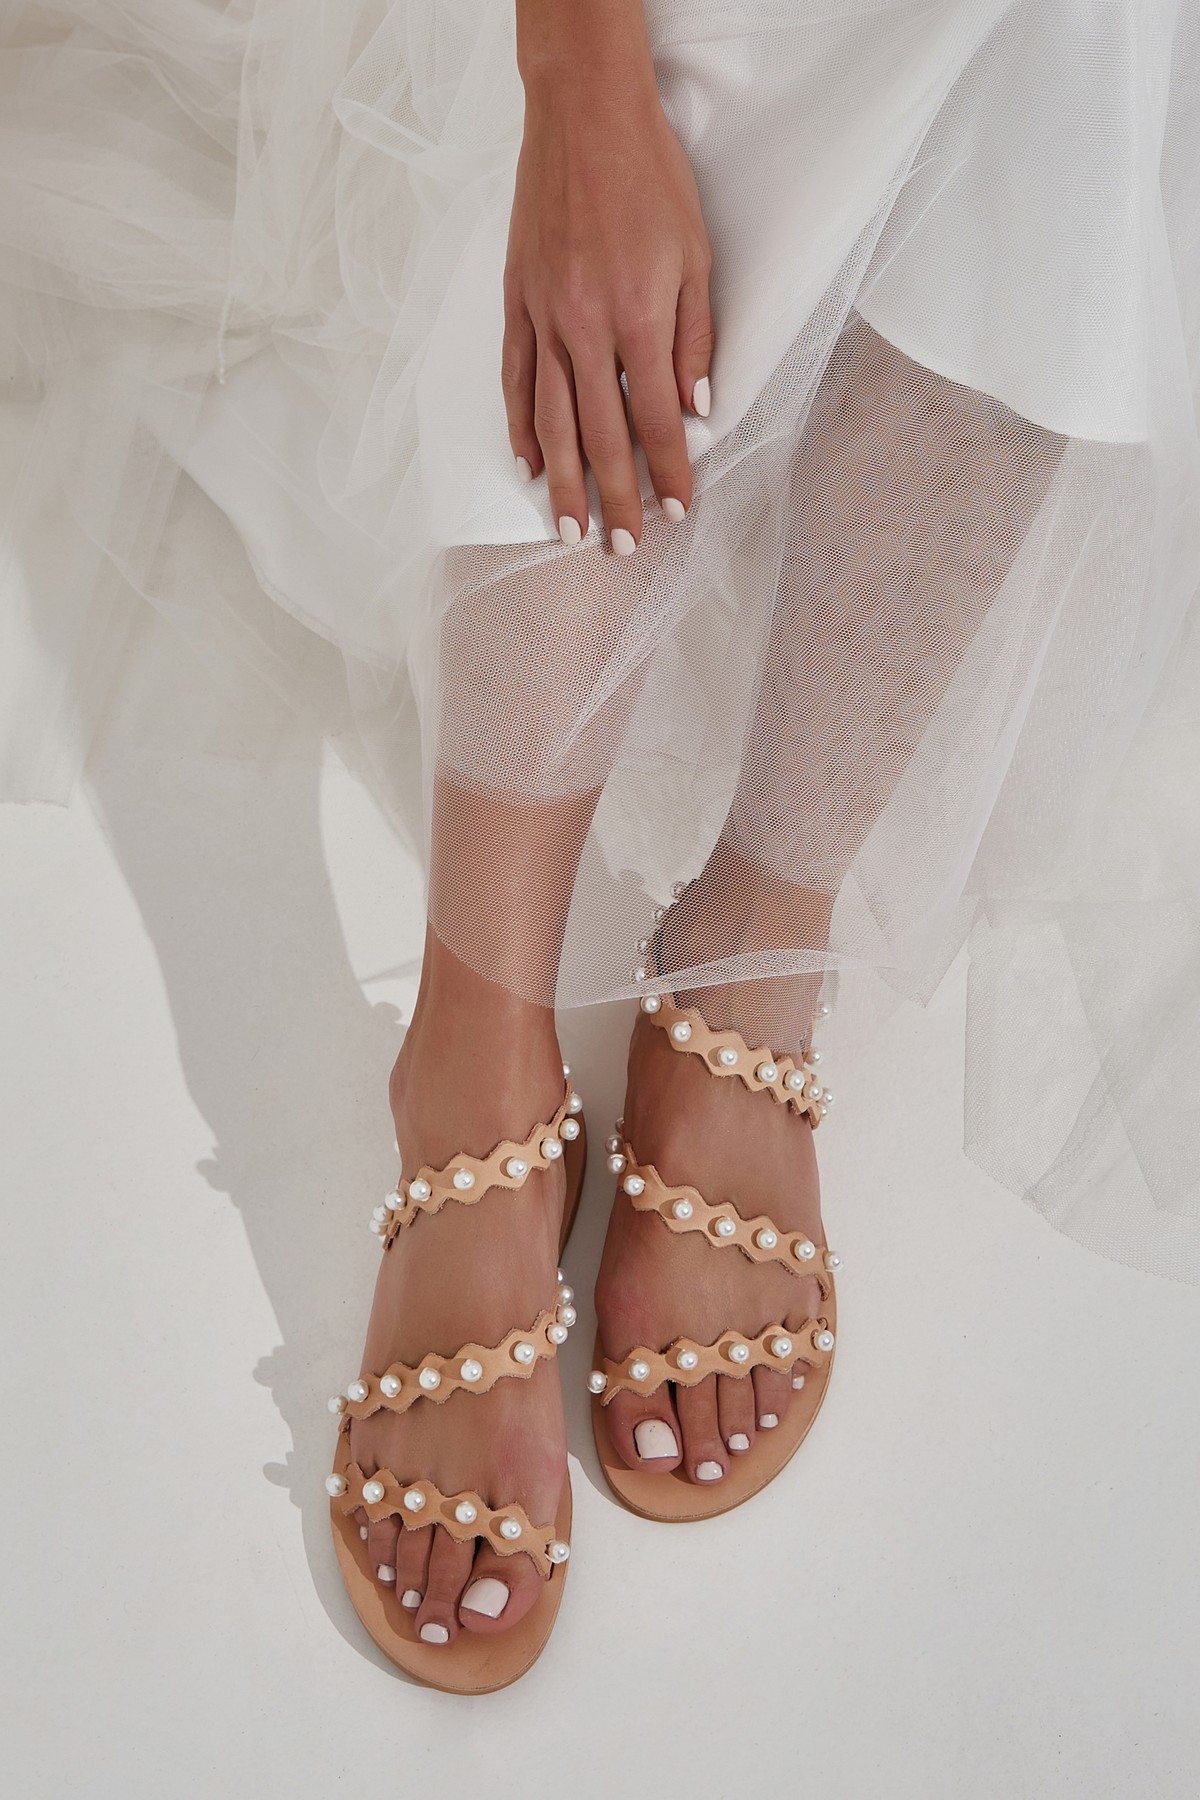 Pearl Sandals for Bride